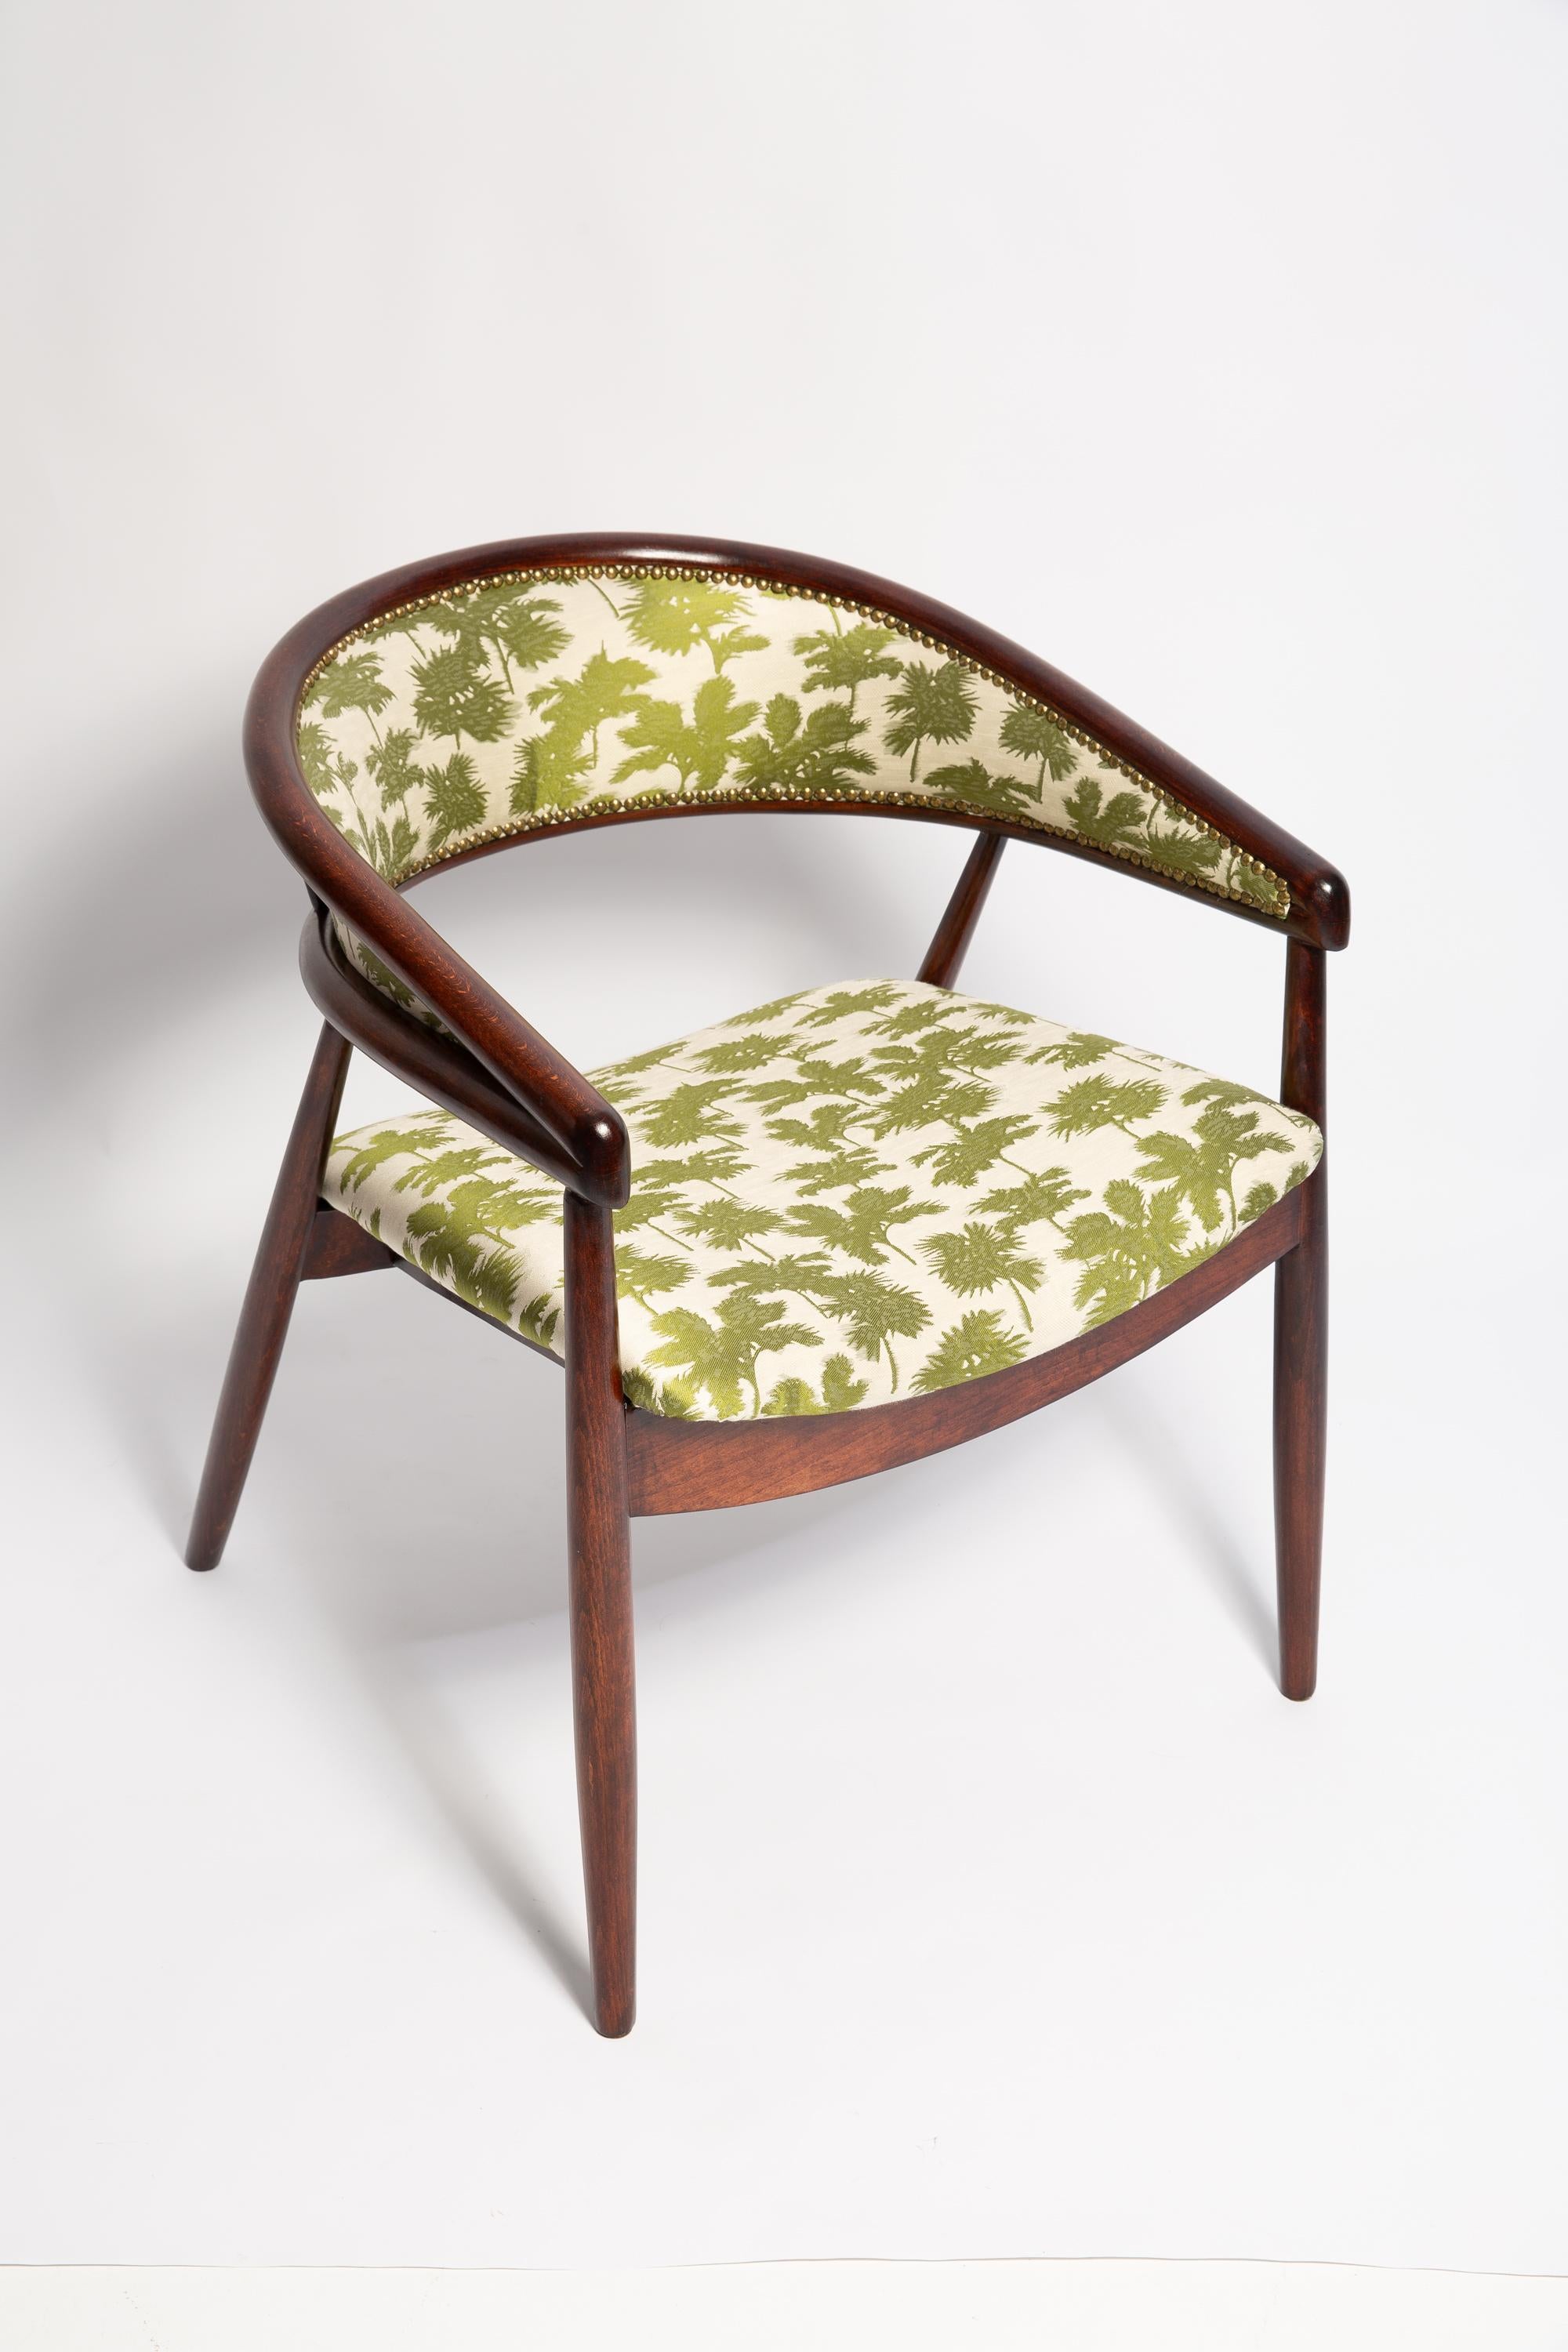 Pair of Mid Century B-3300 Armchairs, Be Bop A Lula Jacquard, 1960s, Europe For Sale 2